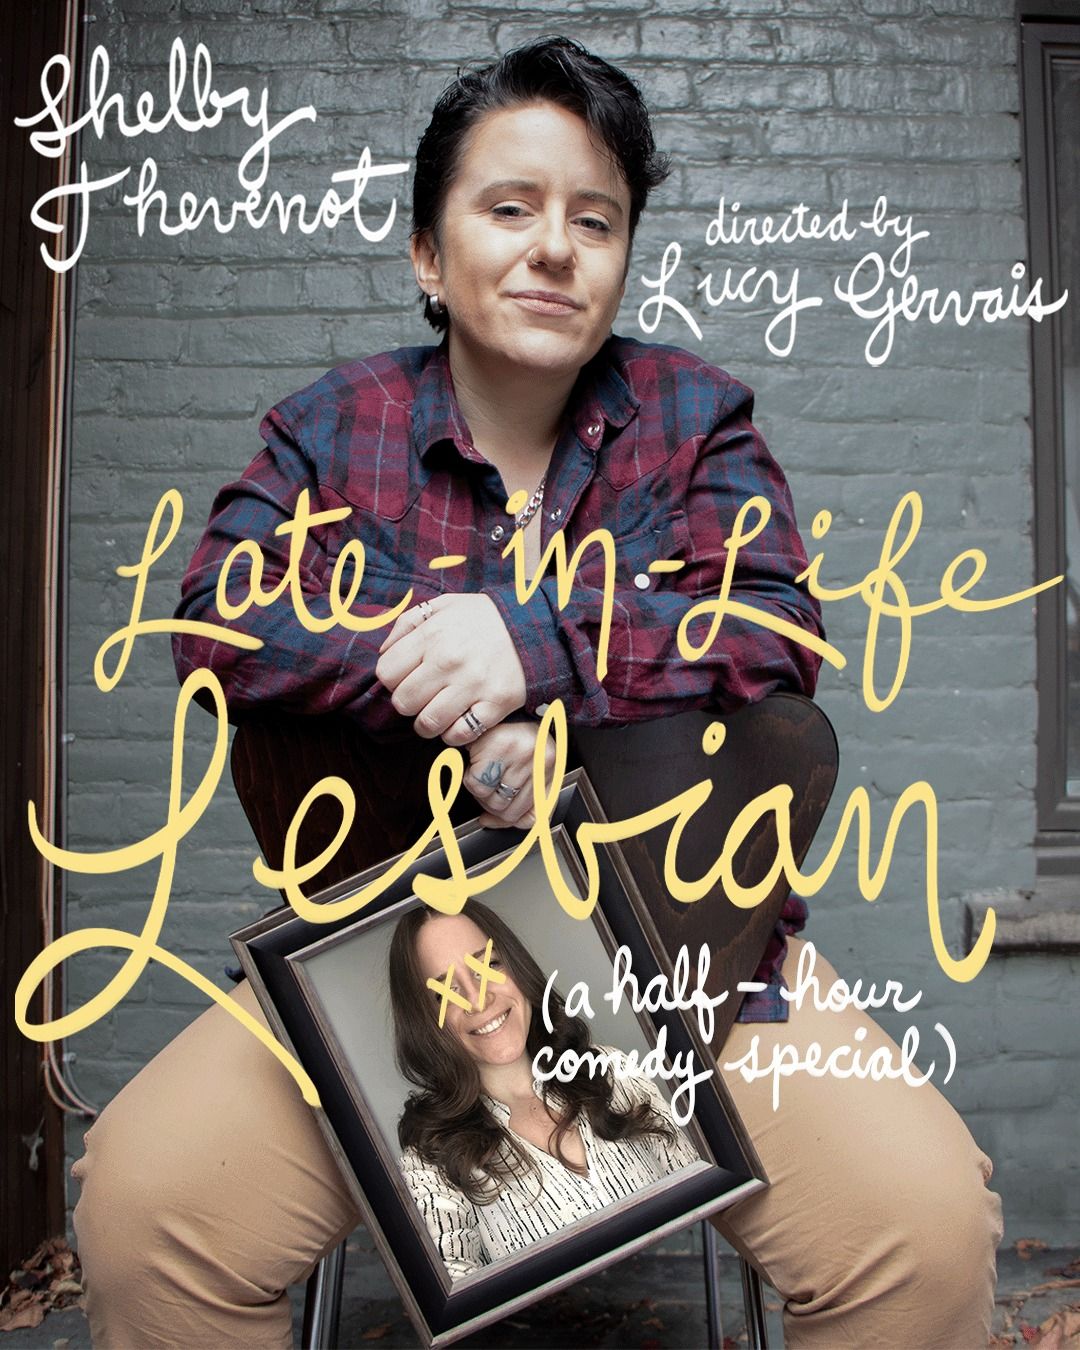 Late in Life Lesbian, a comedy show for the MTL Fringe Festival